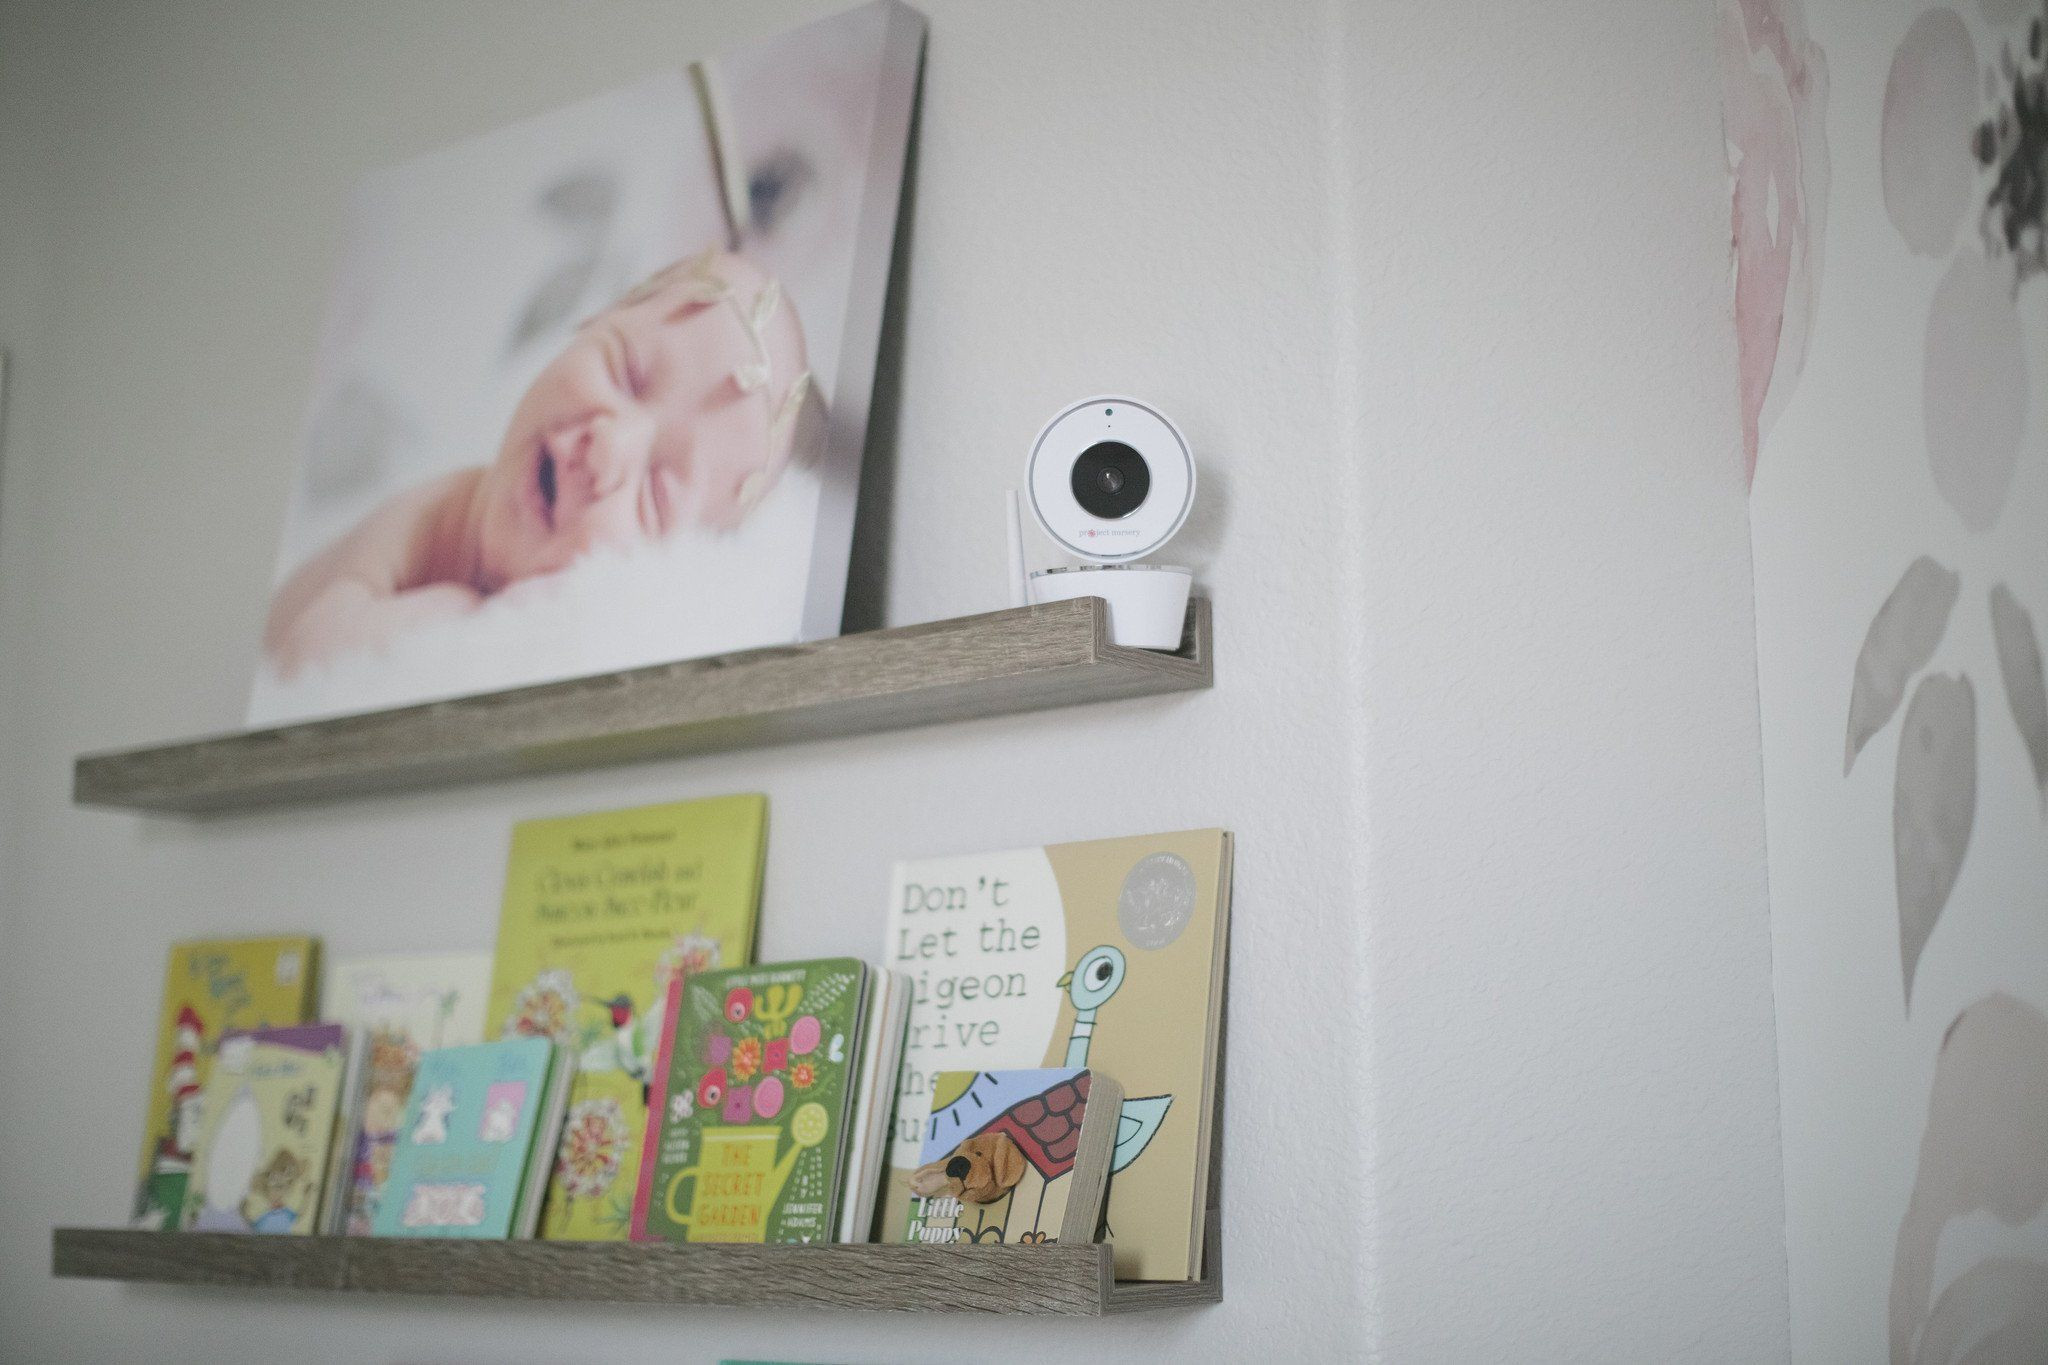 Diy Video Baby Monitor
 Project Nursery 5” High Definition Baby Monitor System